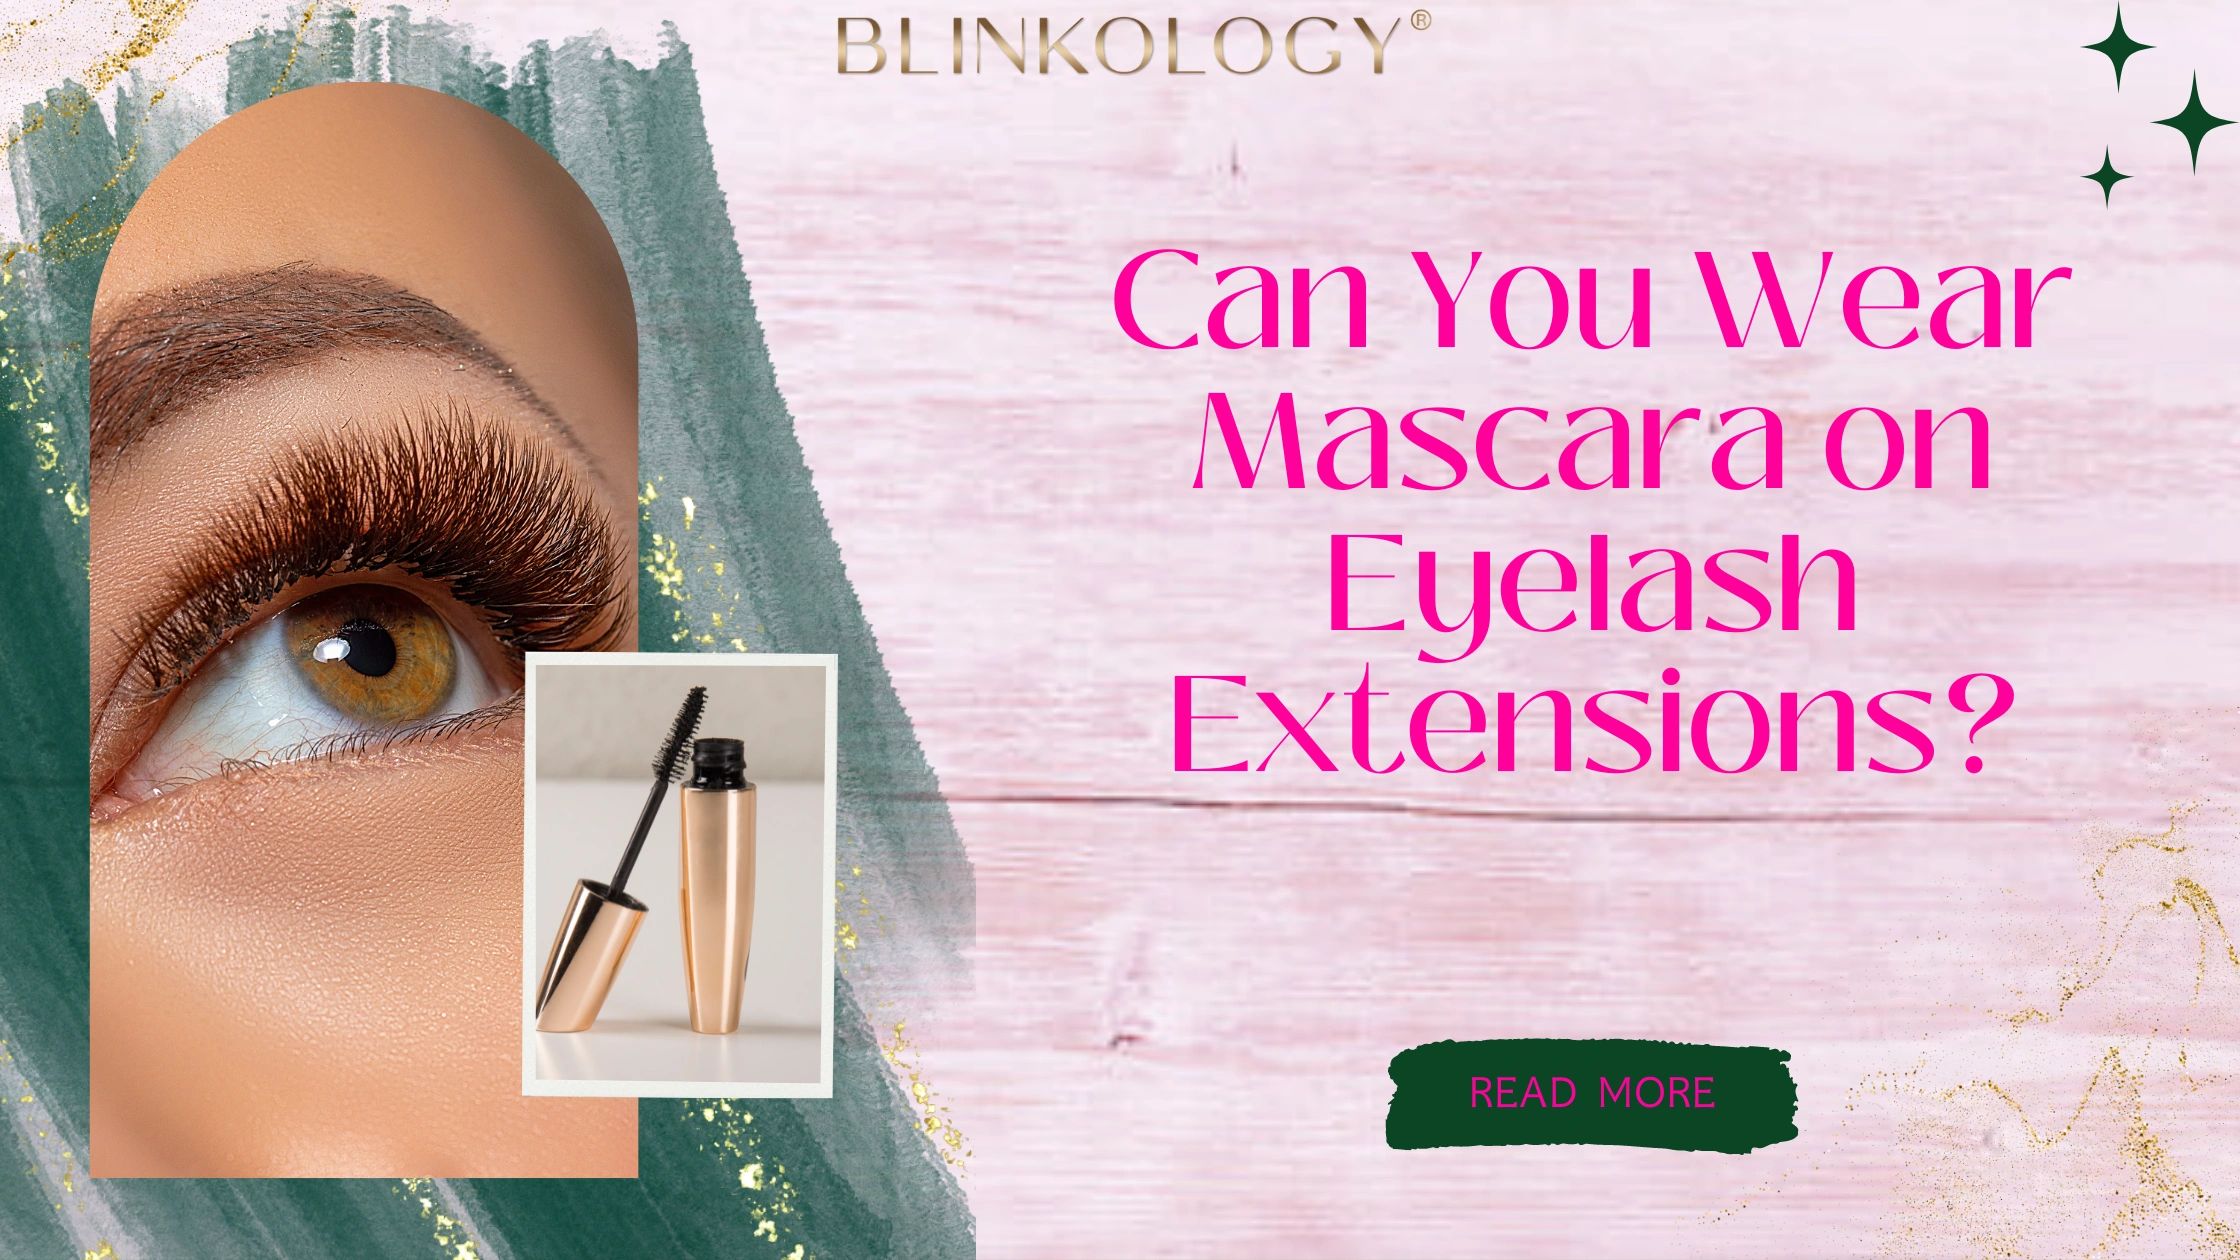 Can You Wear Mascara on Eyelash Extensions?